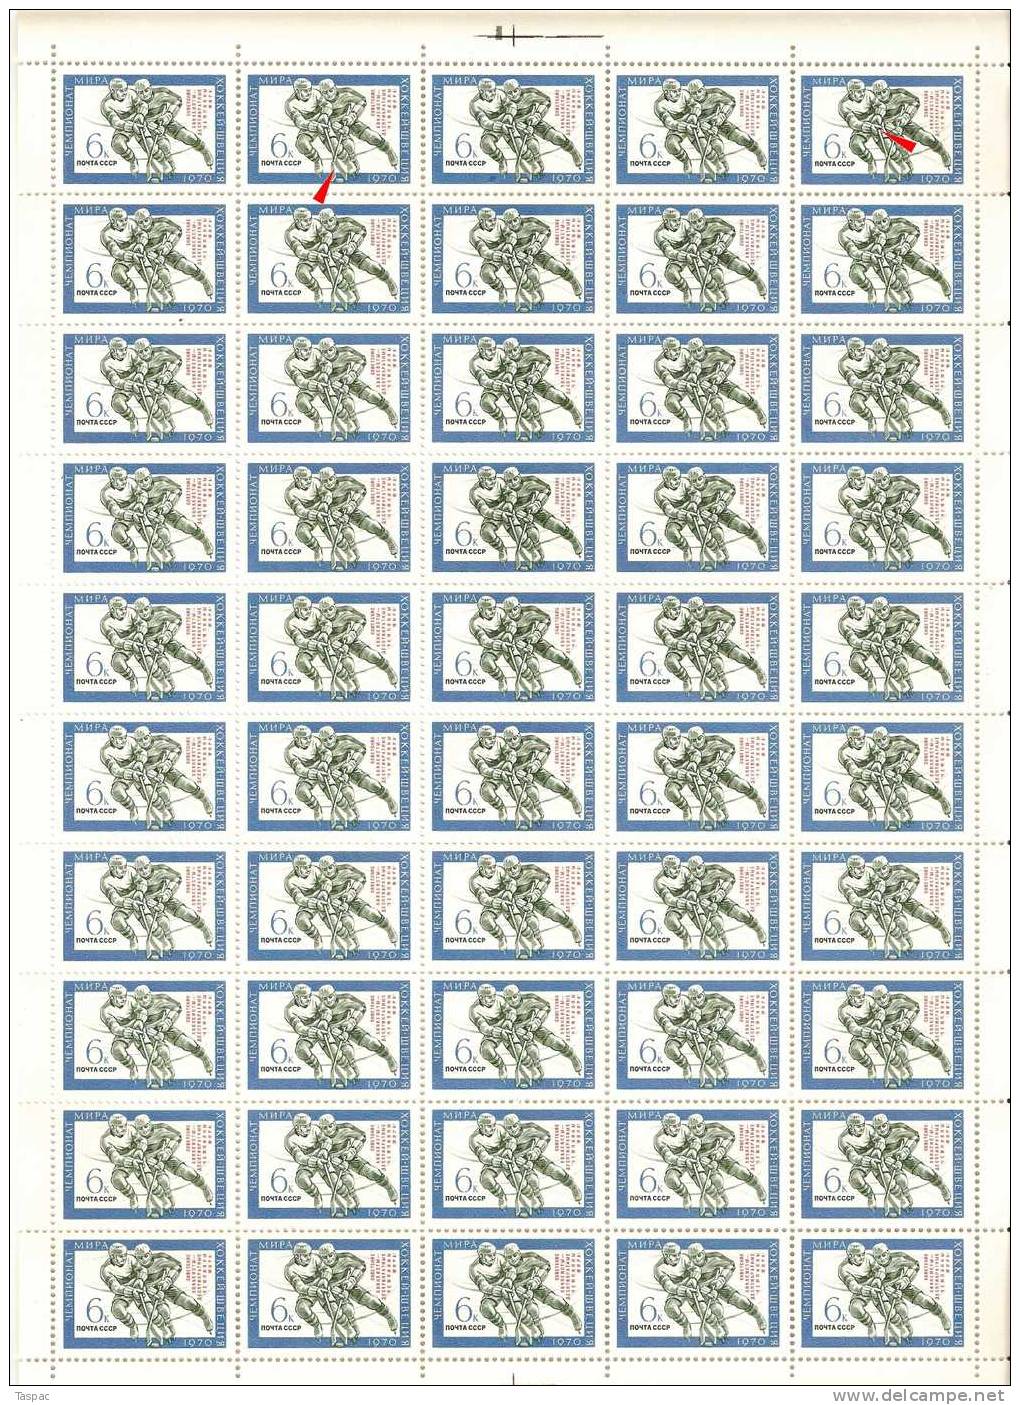 Russia 1970 Mi# 3746 Sheet With Plate Errors Pos. 2 And 5 (B) - Ice Hockey With Overprint - Errors & Oddities